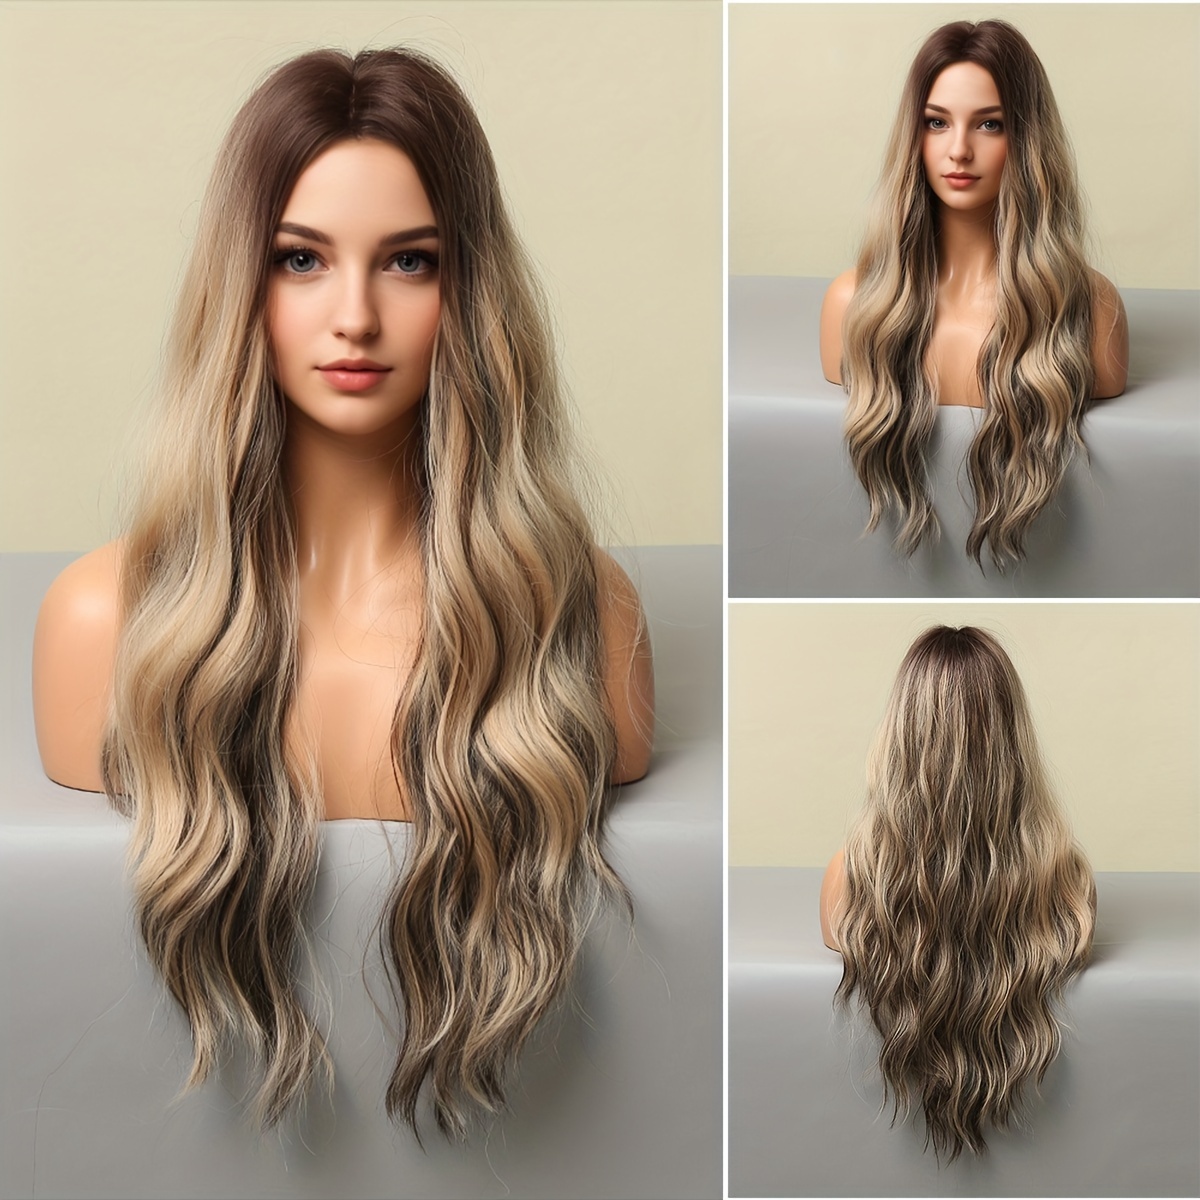 

Synthetic Wig 28 Inch Brown Highlight Dyed Gradient Curly Hair Charm Wig, Relaxed And Fashionable Curly Style, Charming Women's Headwear Suitable For Daily Or Role-playing Use